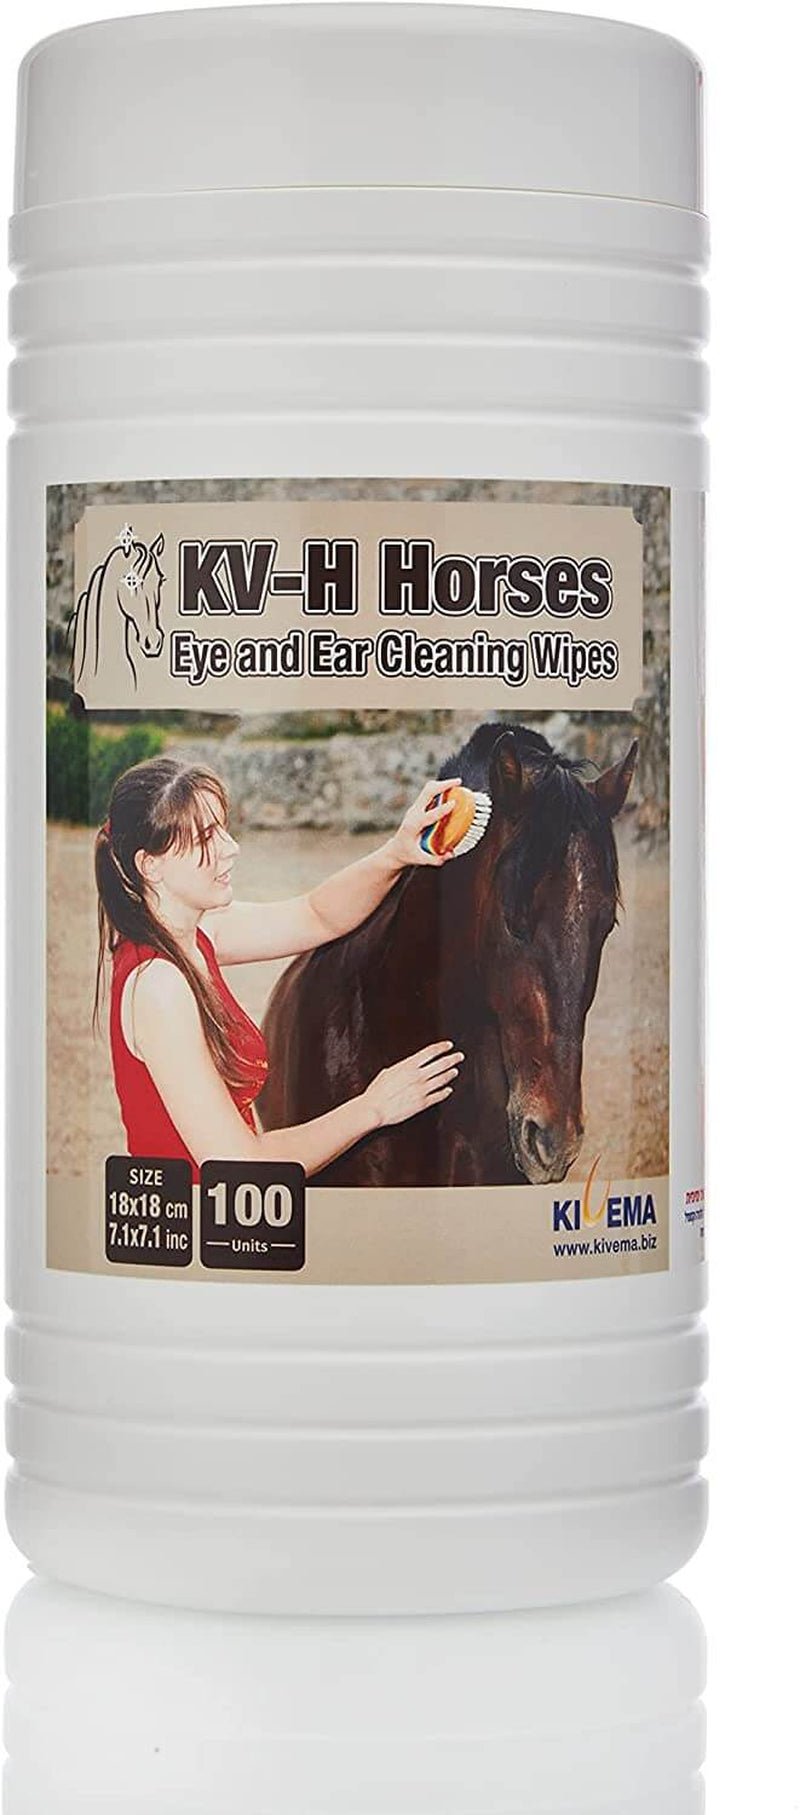 Equine Gentle Touch: Kivema'S Wipes for Horse Eyes, Ears, and Sensitive Areas - PETGS